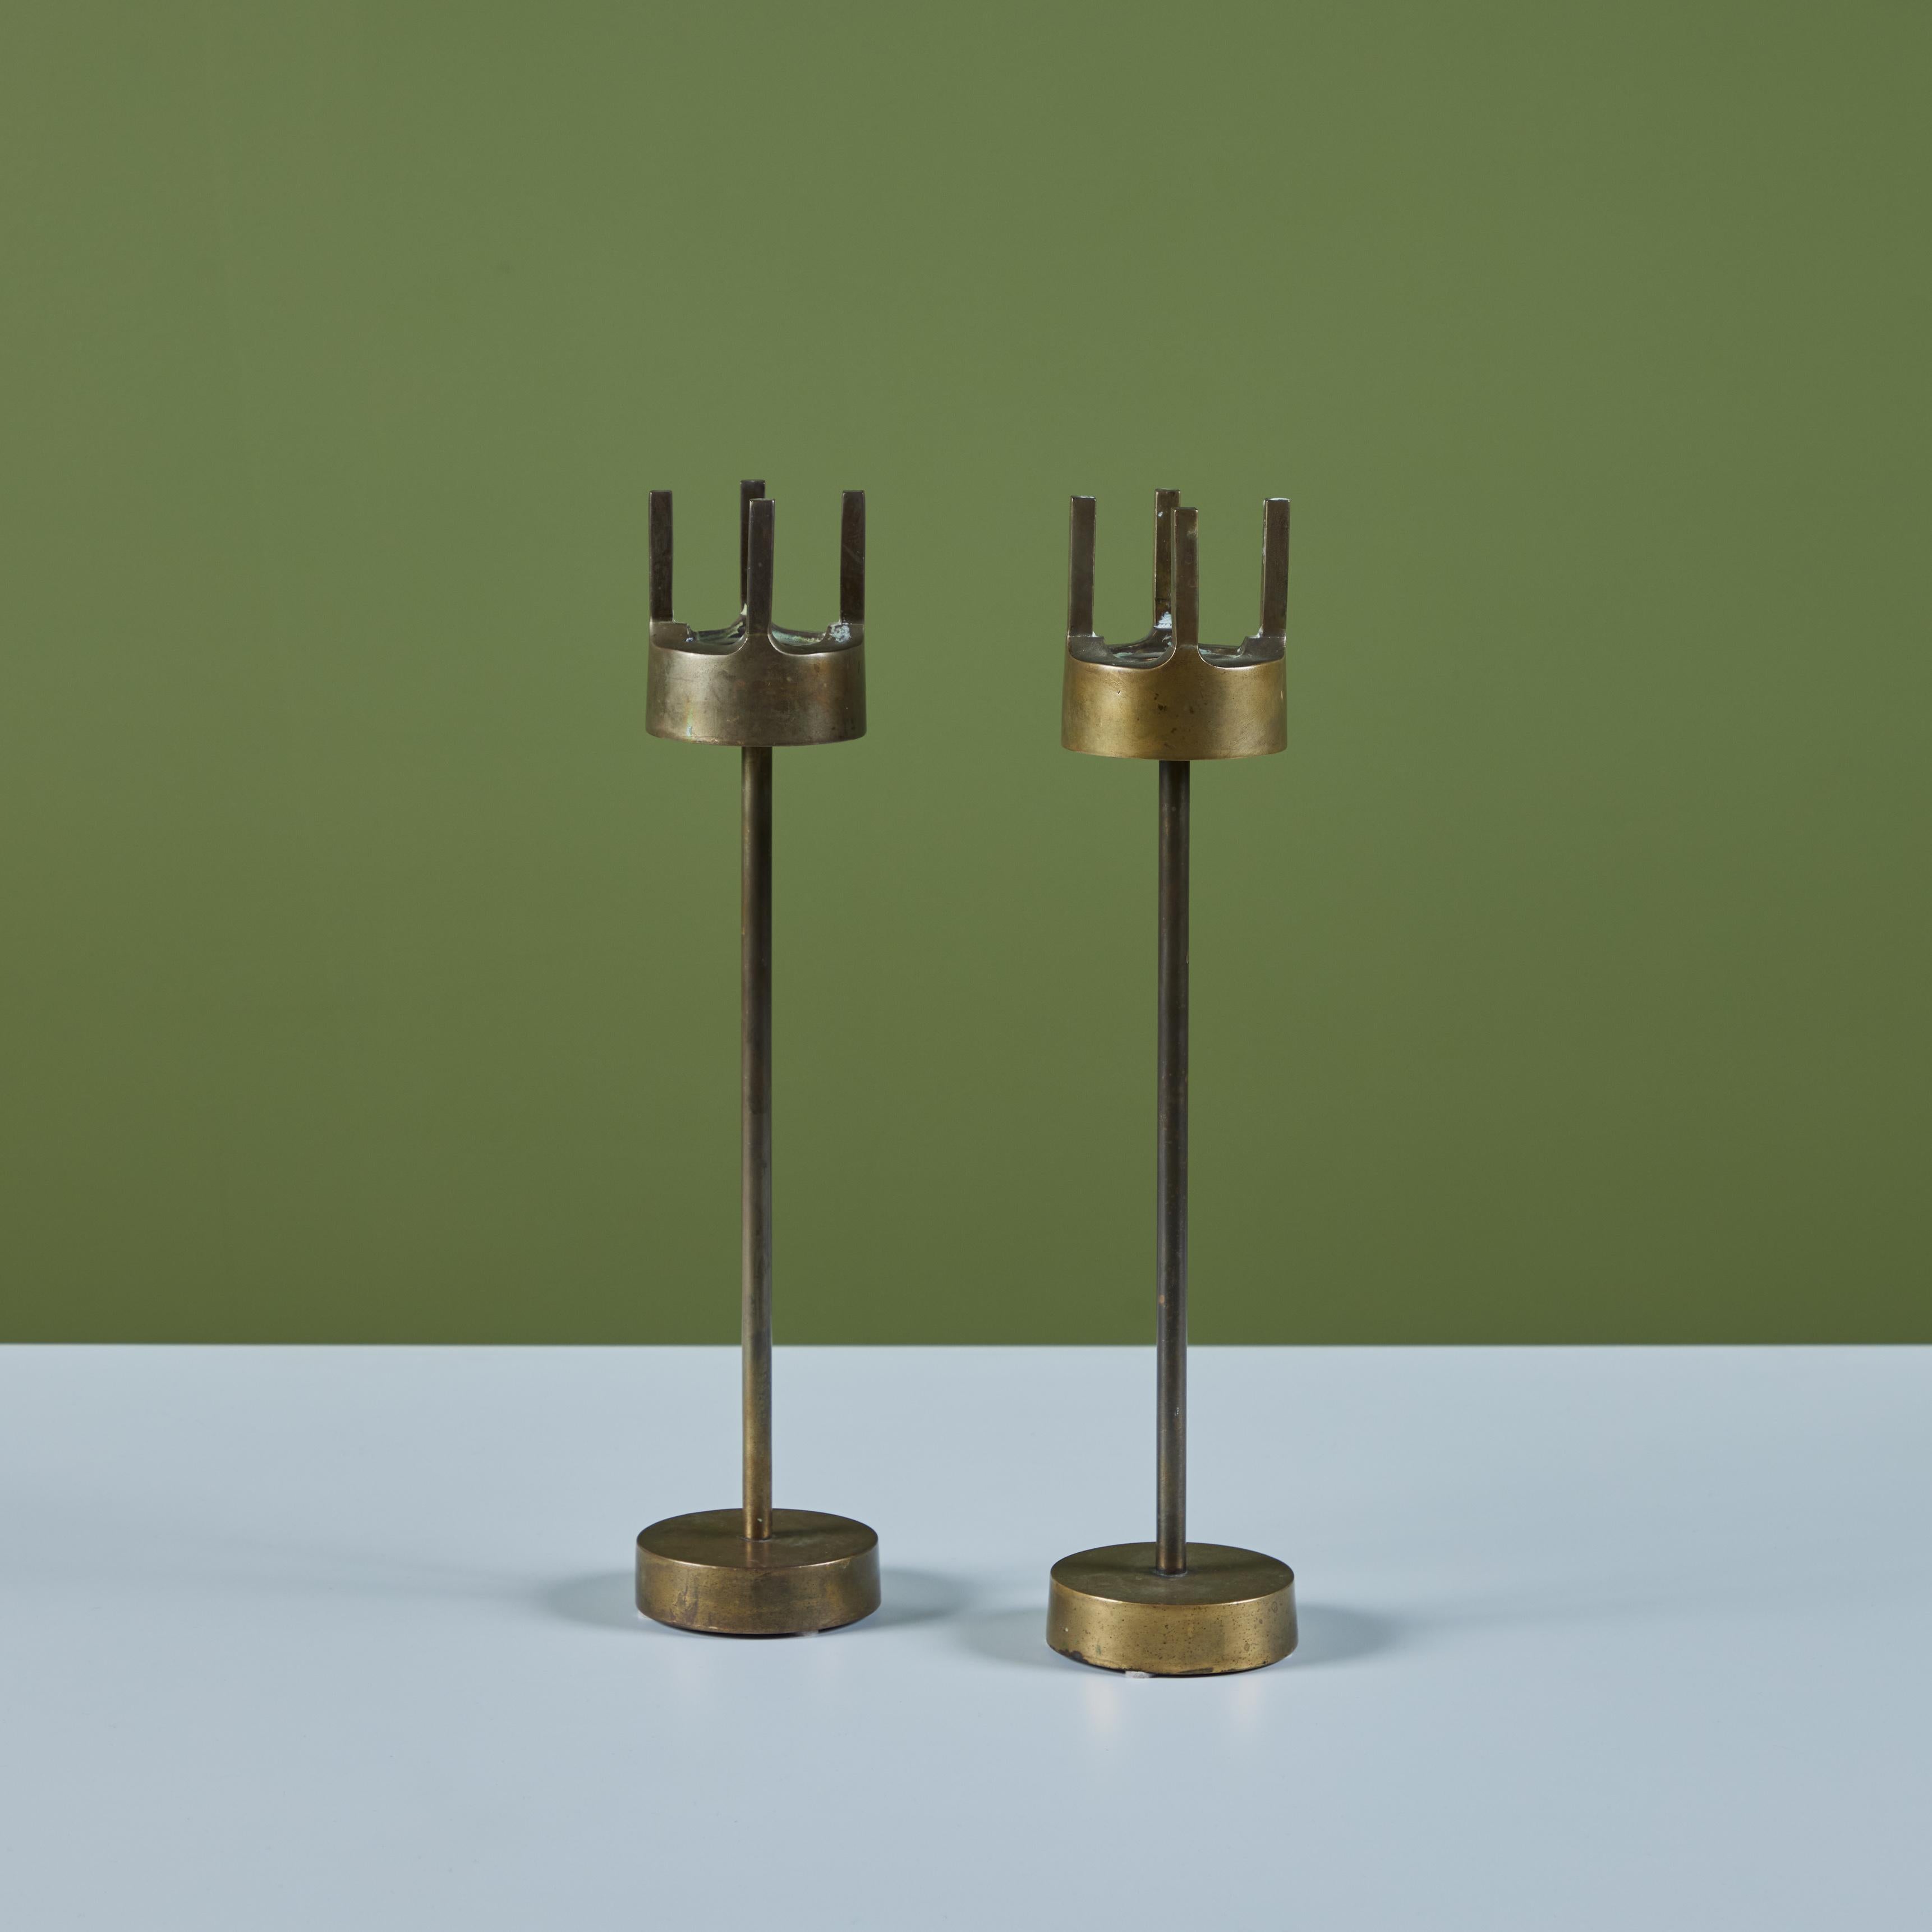 Pair of solid brass candlesticks. The pair of beautifully patinated candlesticks feature thick round bases with narrow stems and the same thick round candle holder with a prong like detail.

Dimensions 
3